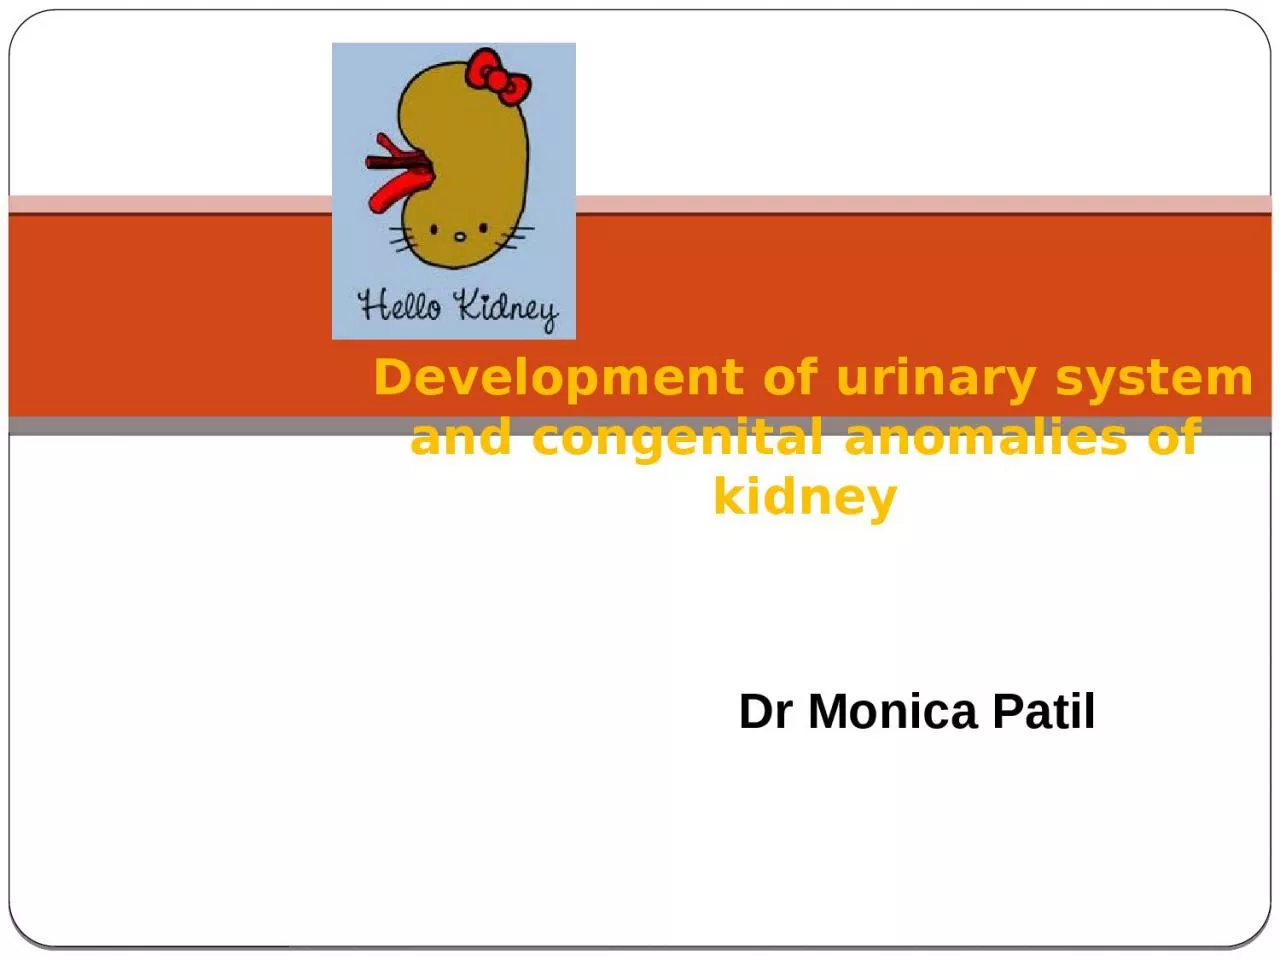 Development of urinary system and congenital anomalies of kidney